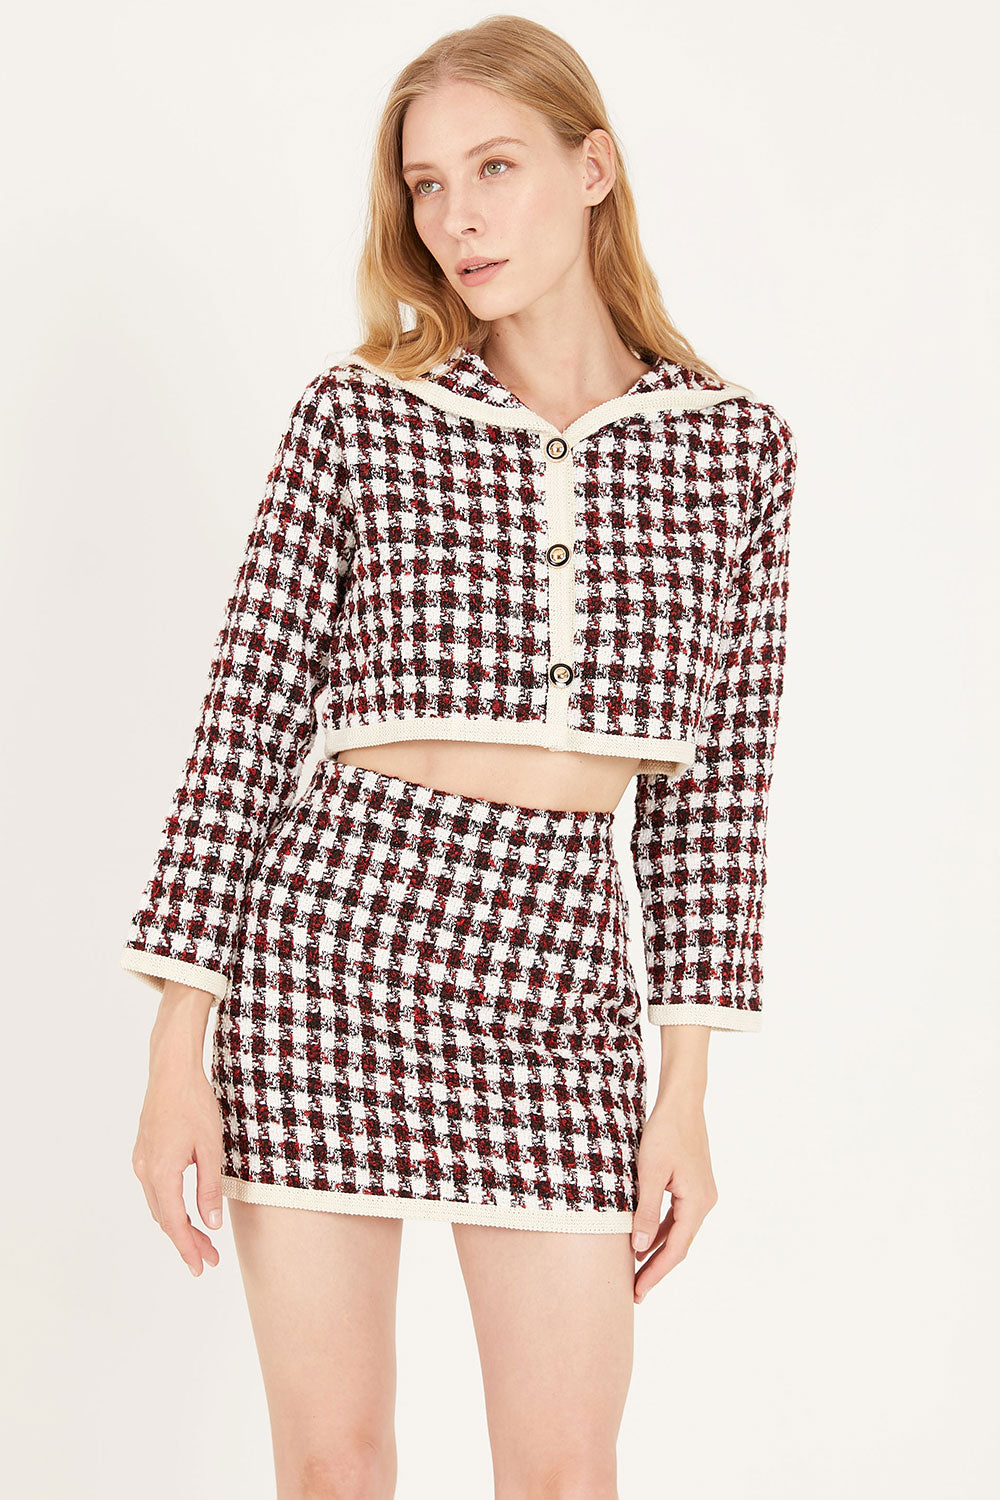 storets.com Reese Houndstooth Jacket and Skirt Set